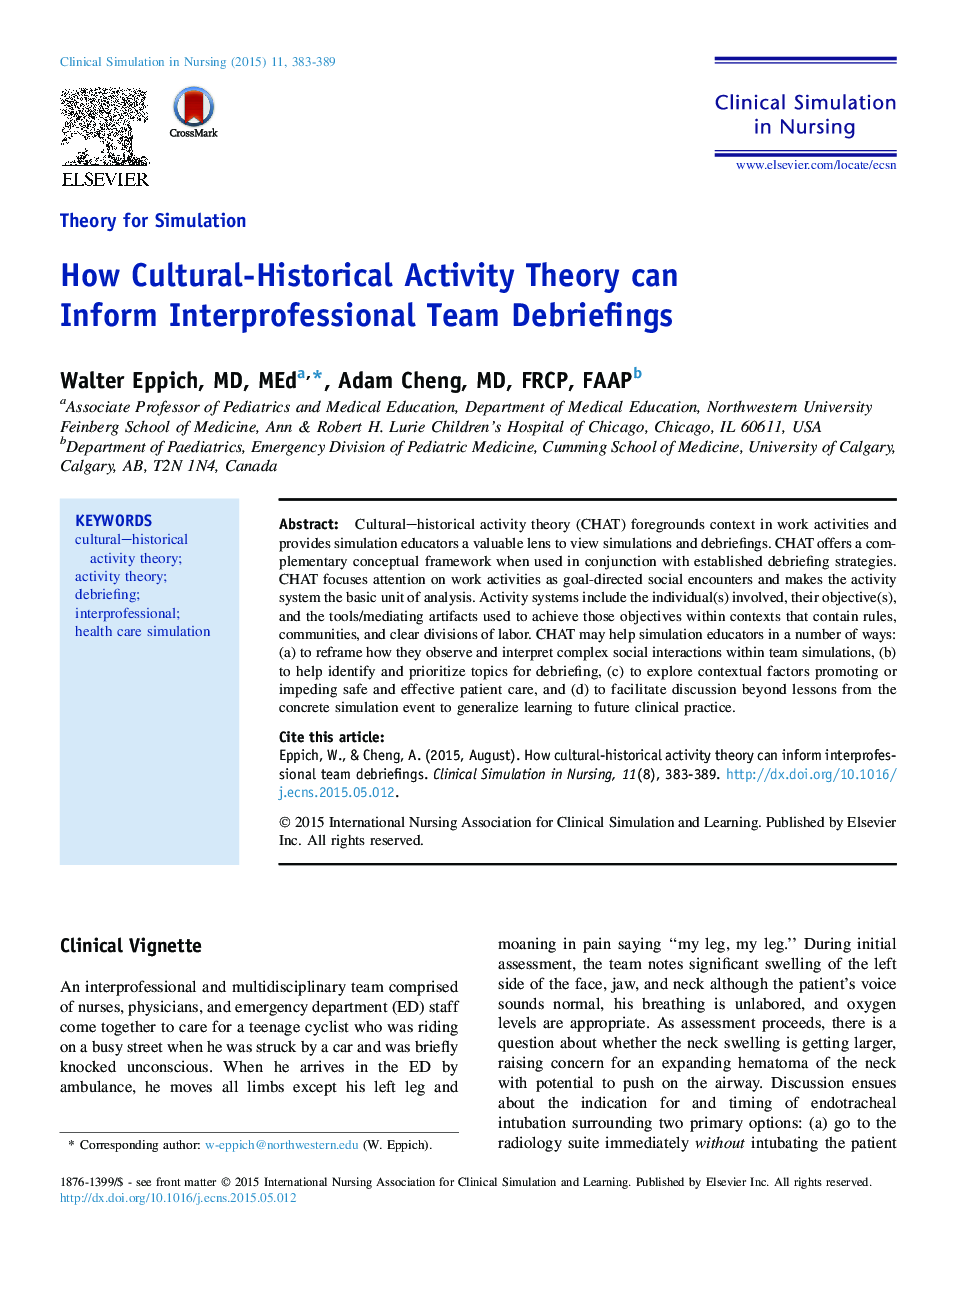 How Cultural-Historical Activity Theory can Inform Interprofessional Team Debriefings